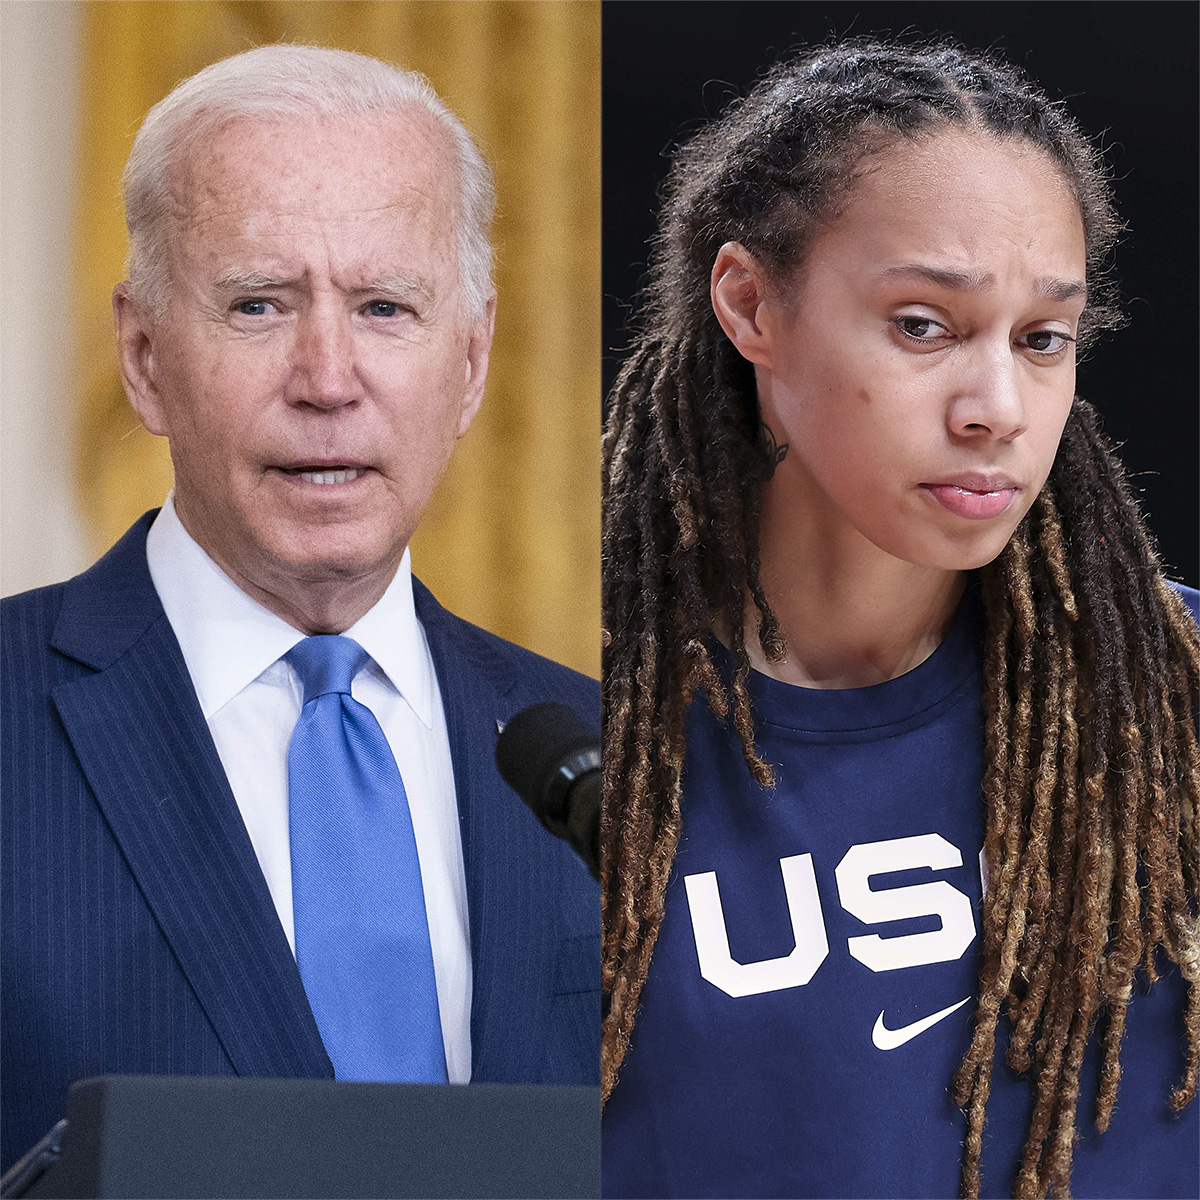 President Biden Meets With Brittney Griner's Wife at White House as WNBA Star Remains in Prison